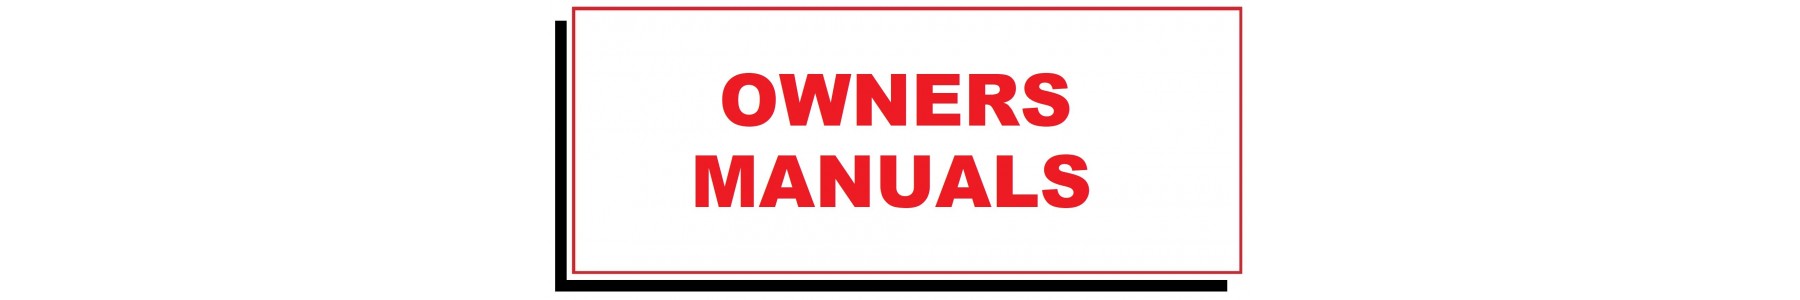 OWNERS MANUALS & JACKING INSTRUCTIONS